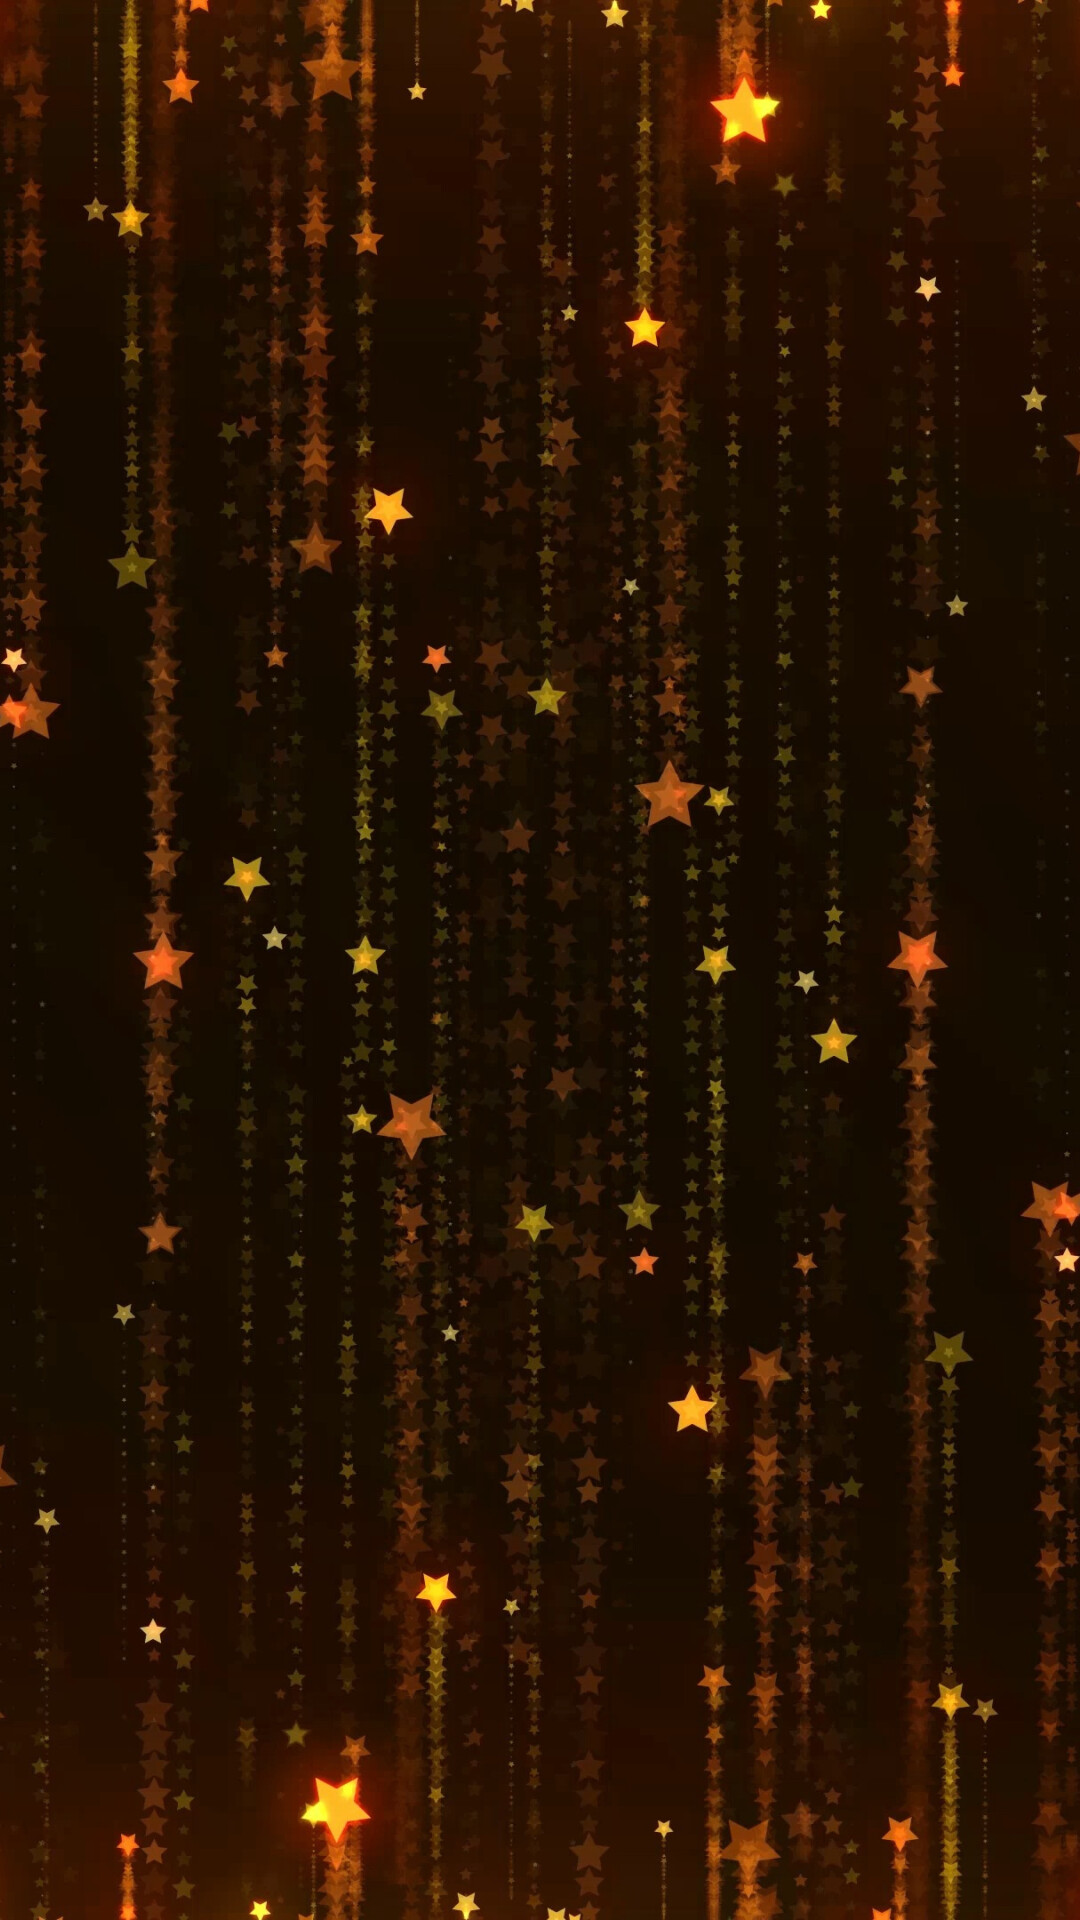 Gold Star: Abstract falling stars, Out-of-focus blurred lights, Self-luminous celestial bodies. 1080x1920 Full HD Wallpaper.